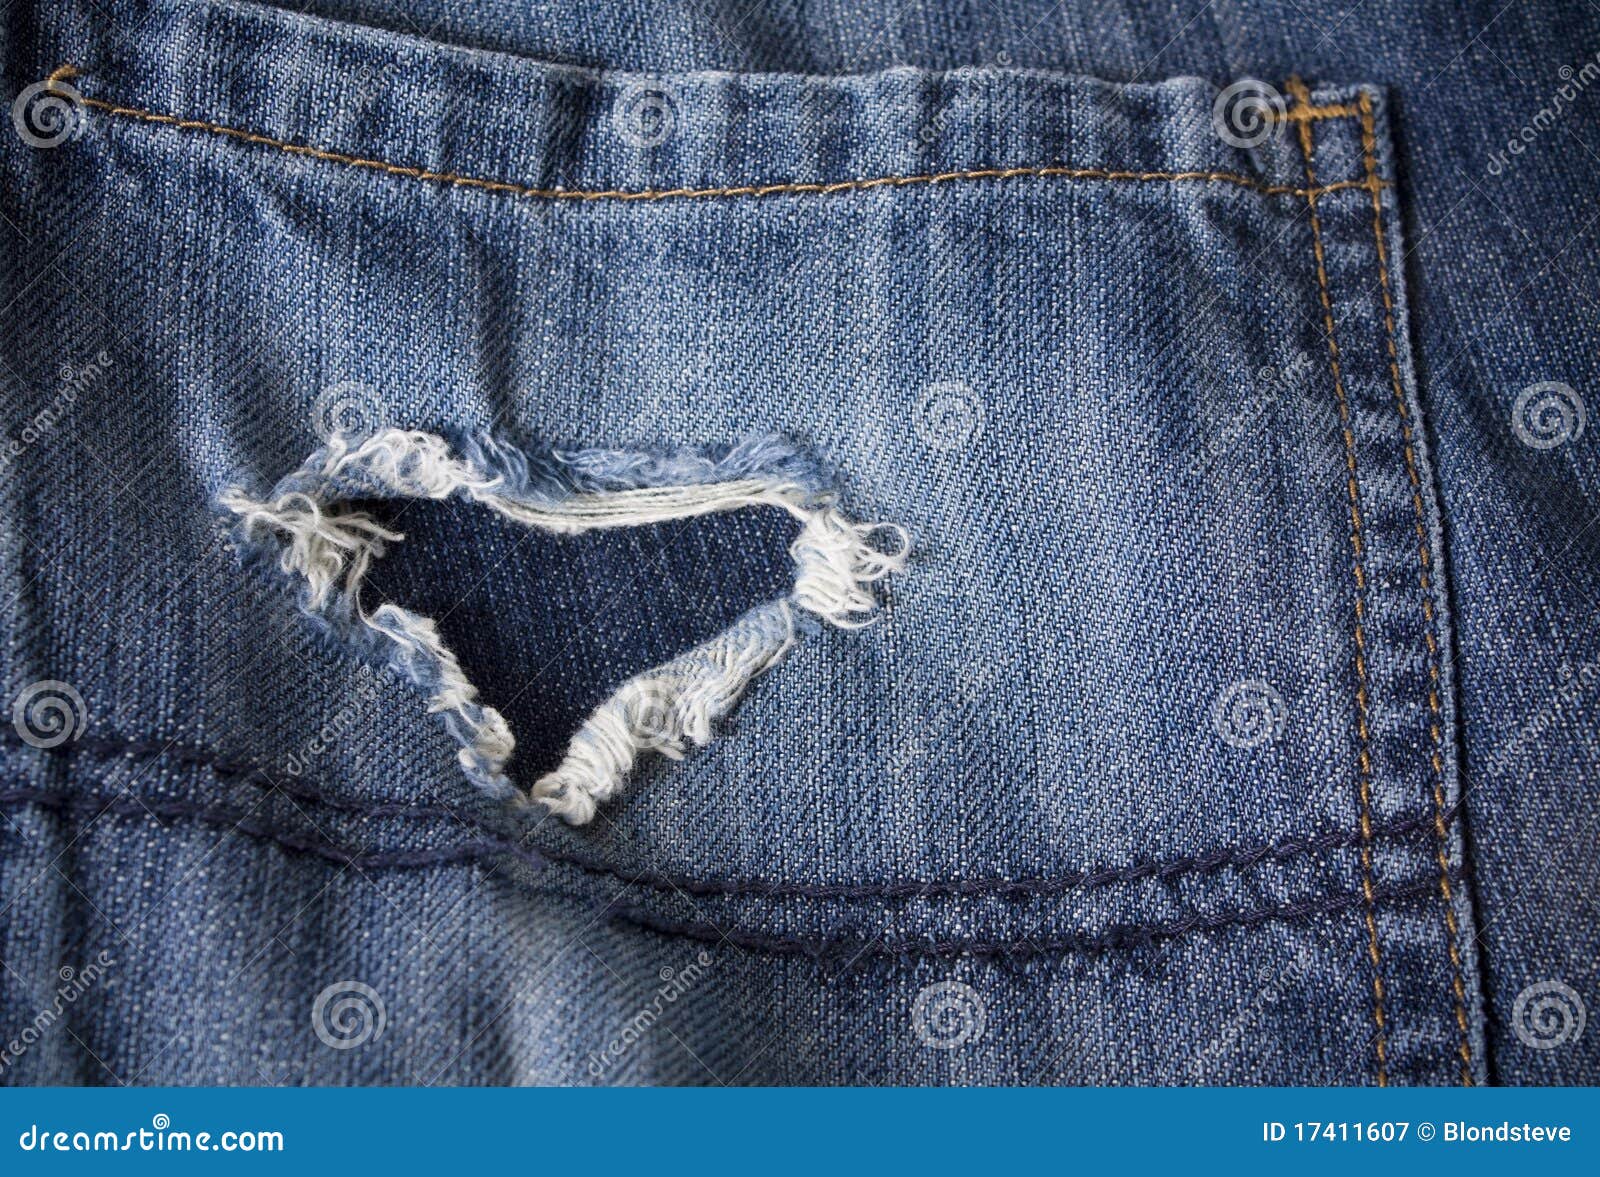 Pair of Old Jeans with Heart Shaped Rip Stock Image - Image of frayed ...